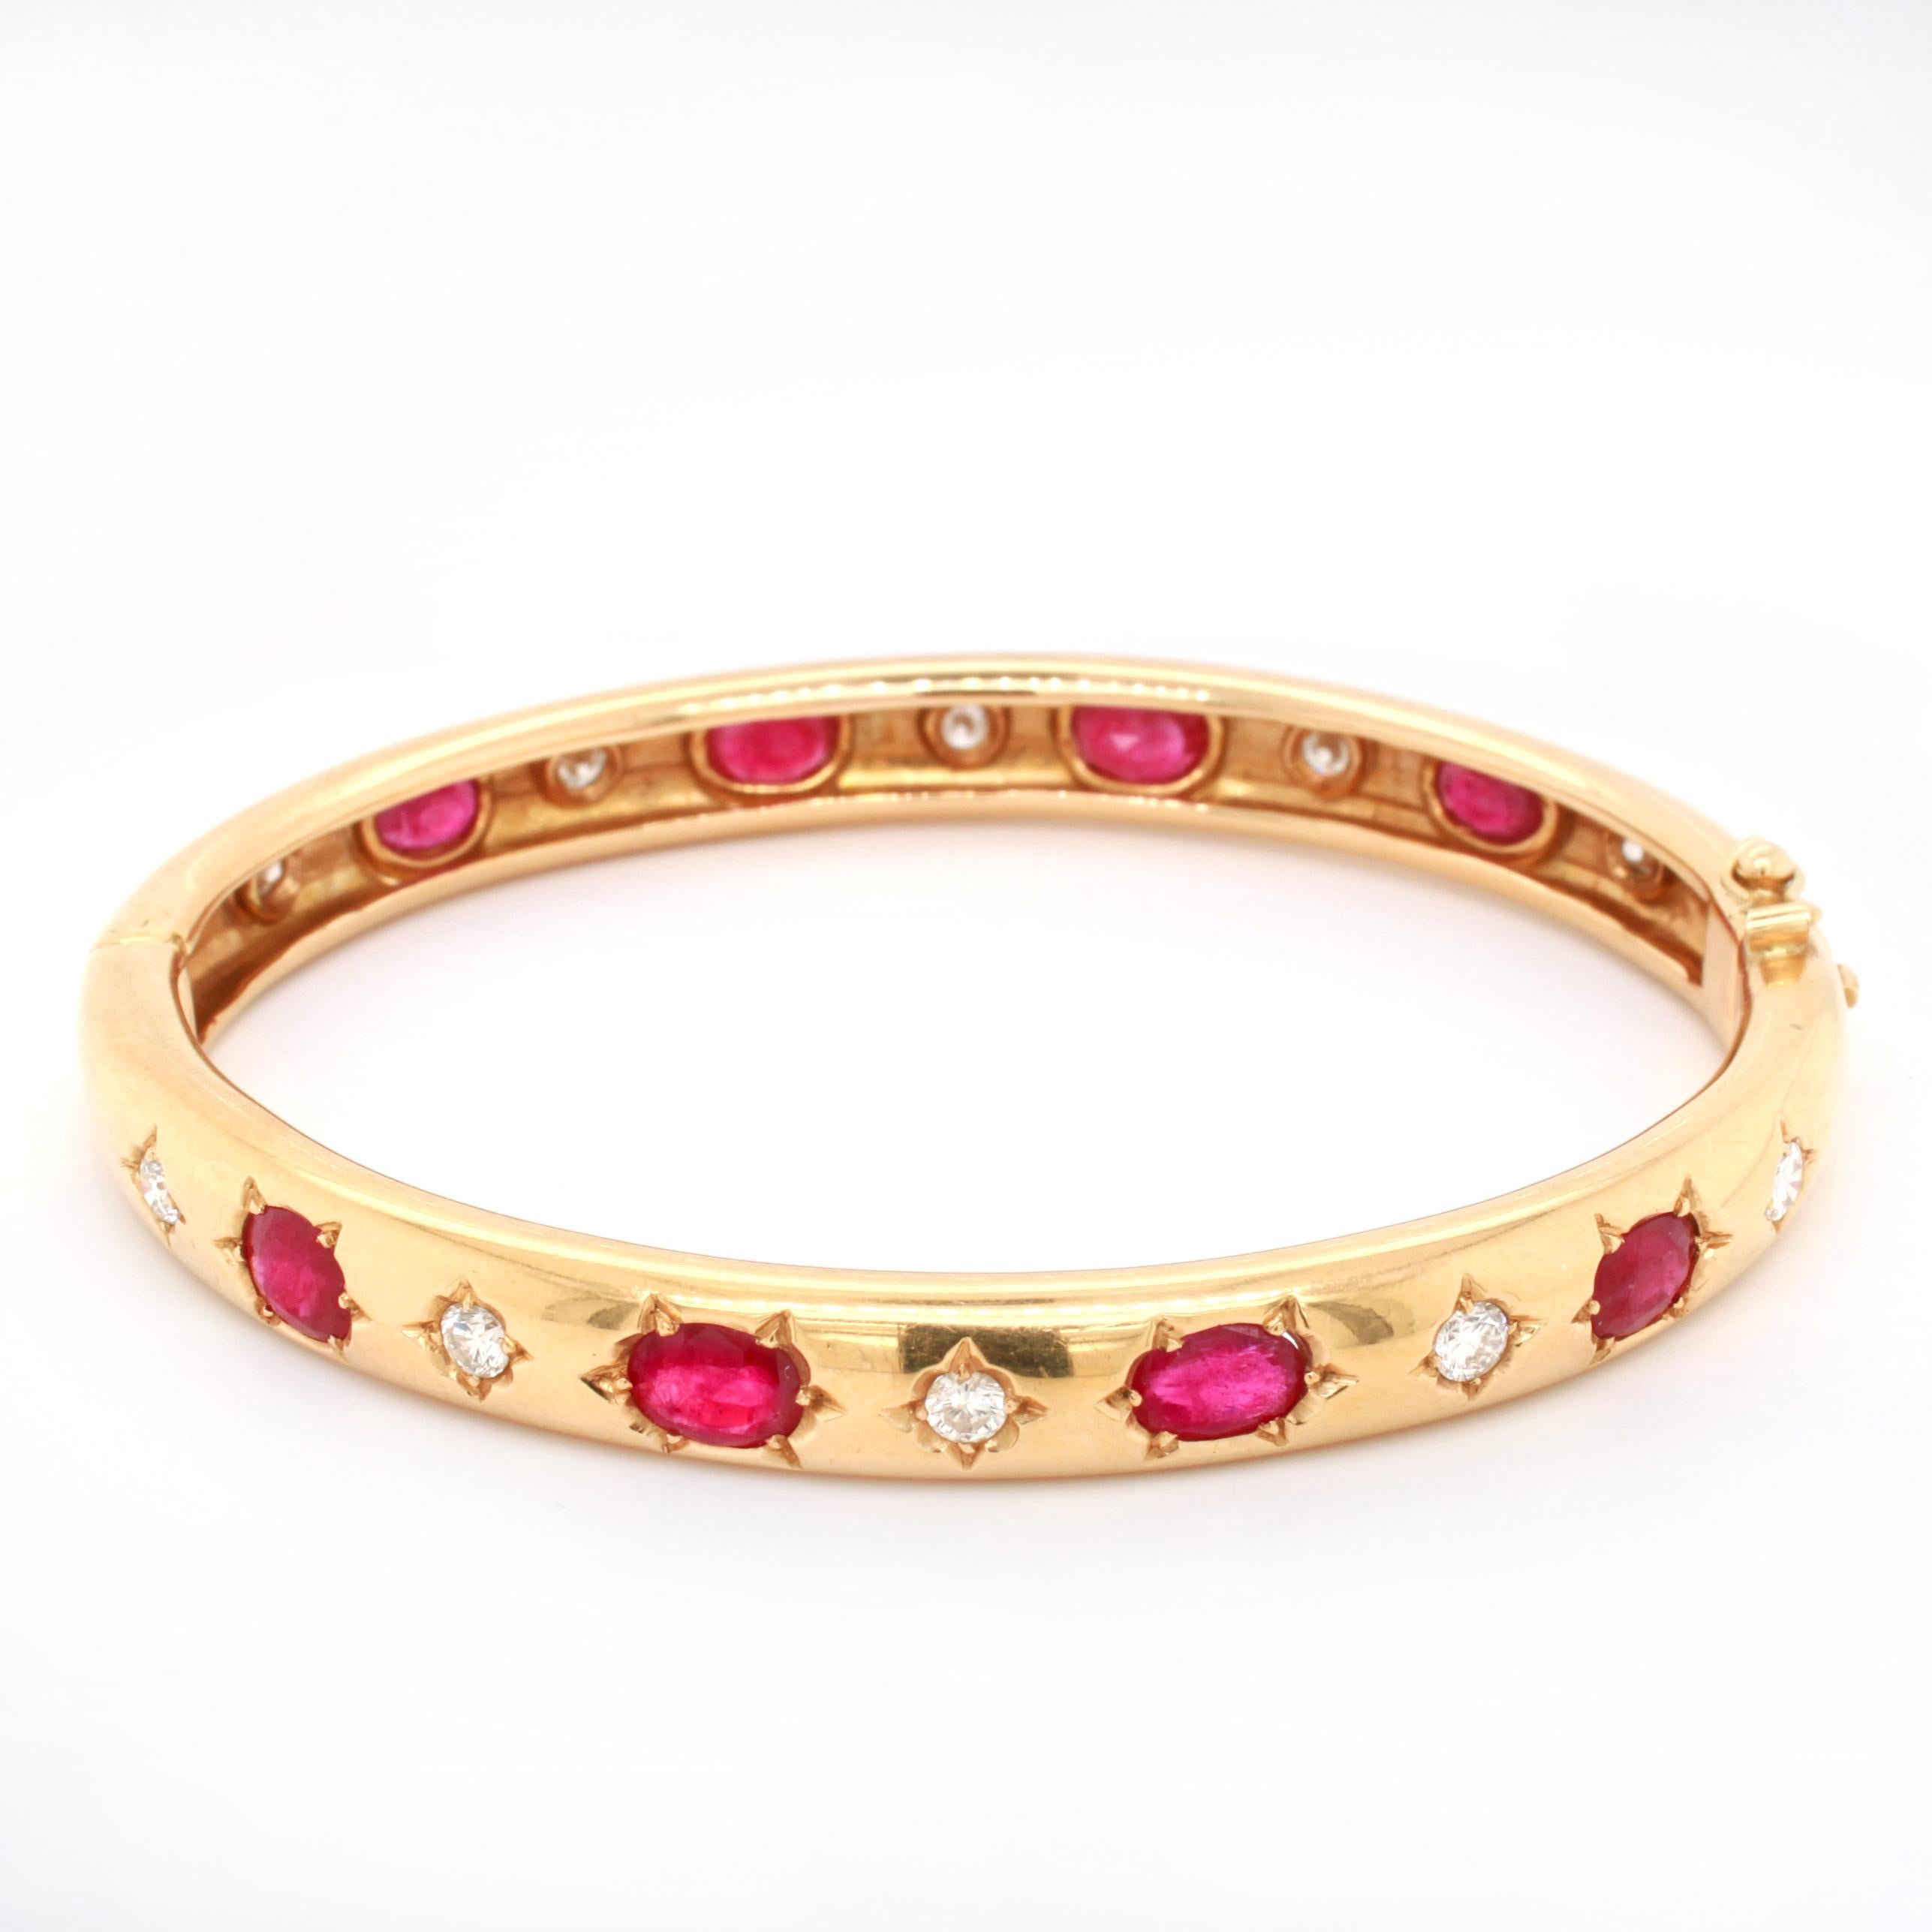 A ruby and diamond bangle in 18k yellow gold. The bangle is alternatingly set with eight cushion shaped rubies, probably of Burmese origin, weighing approximately 6 carats in total and ten round brilliant cut diamonds, weighing approximately 1.2